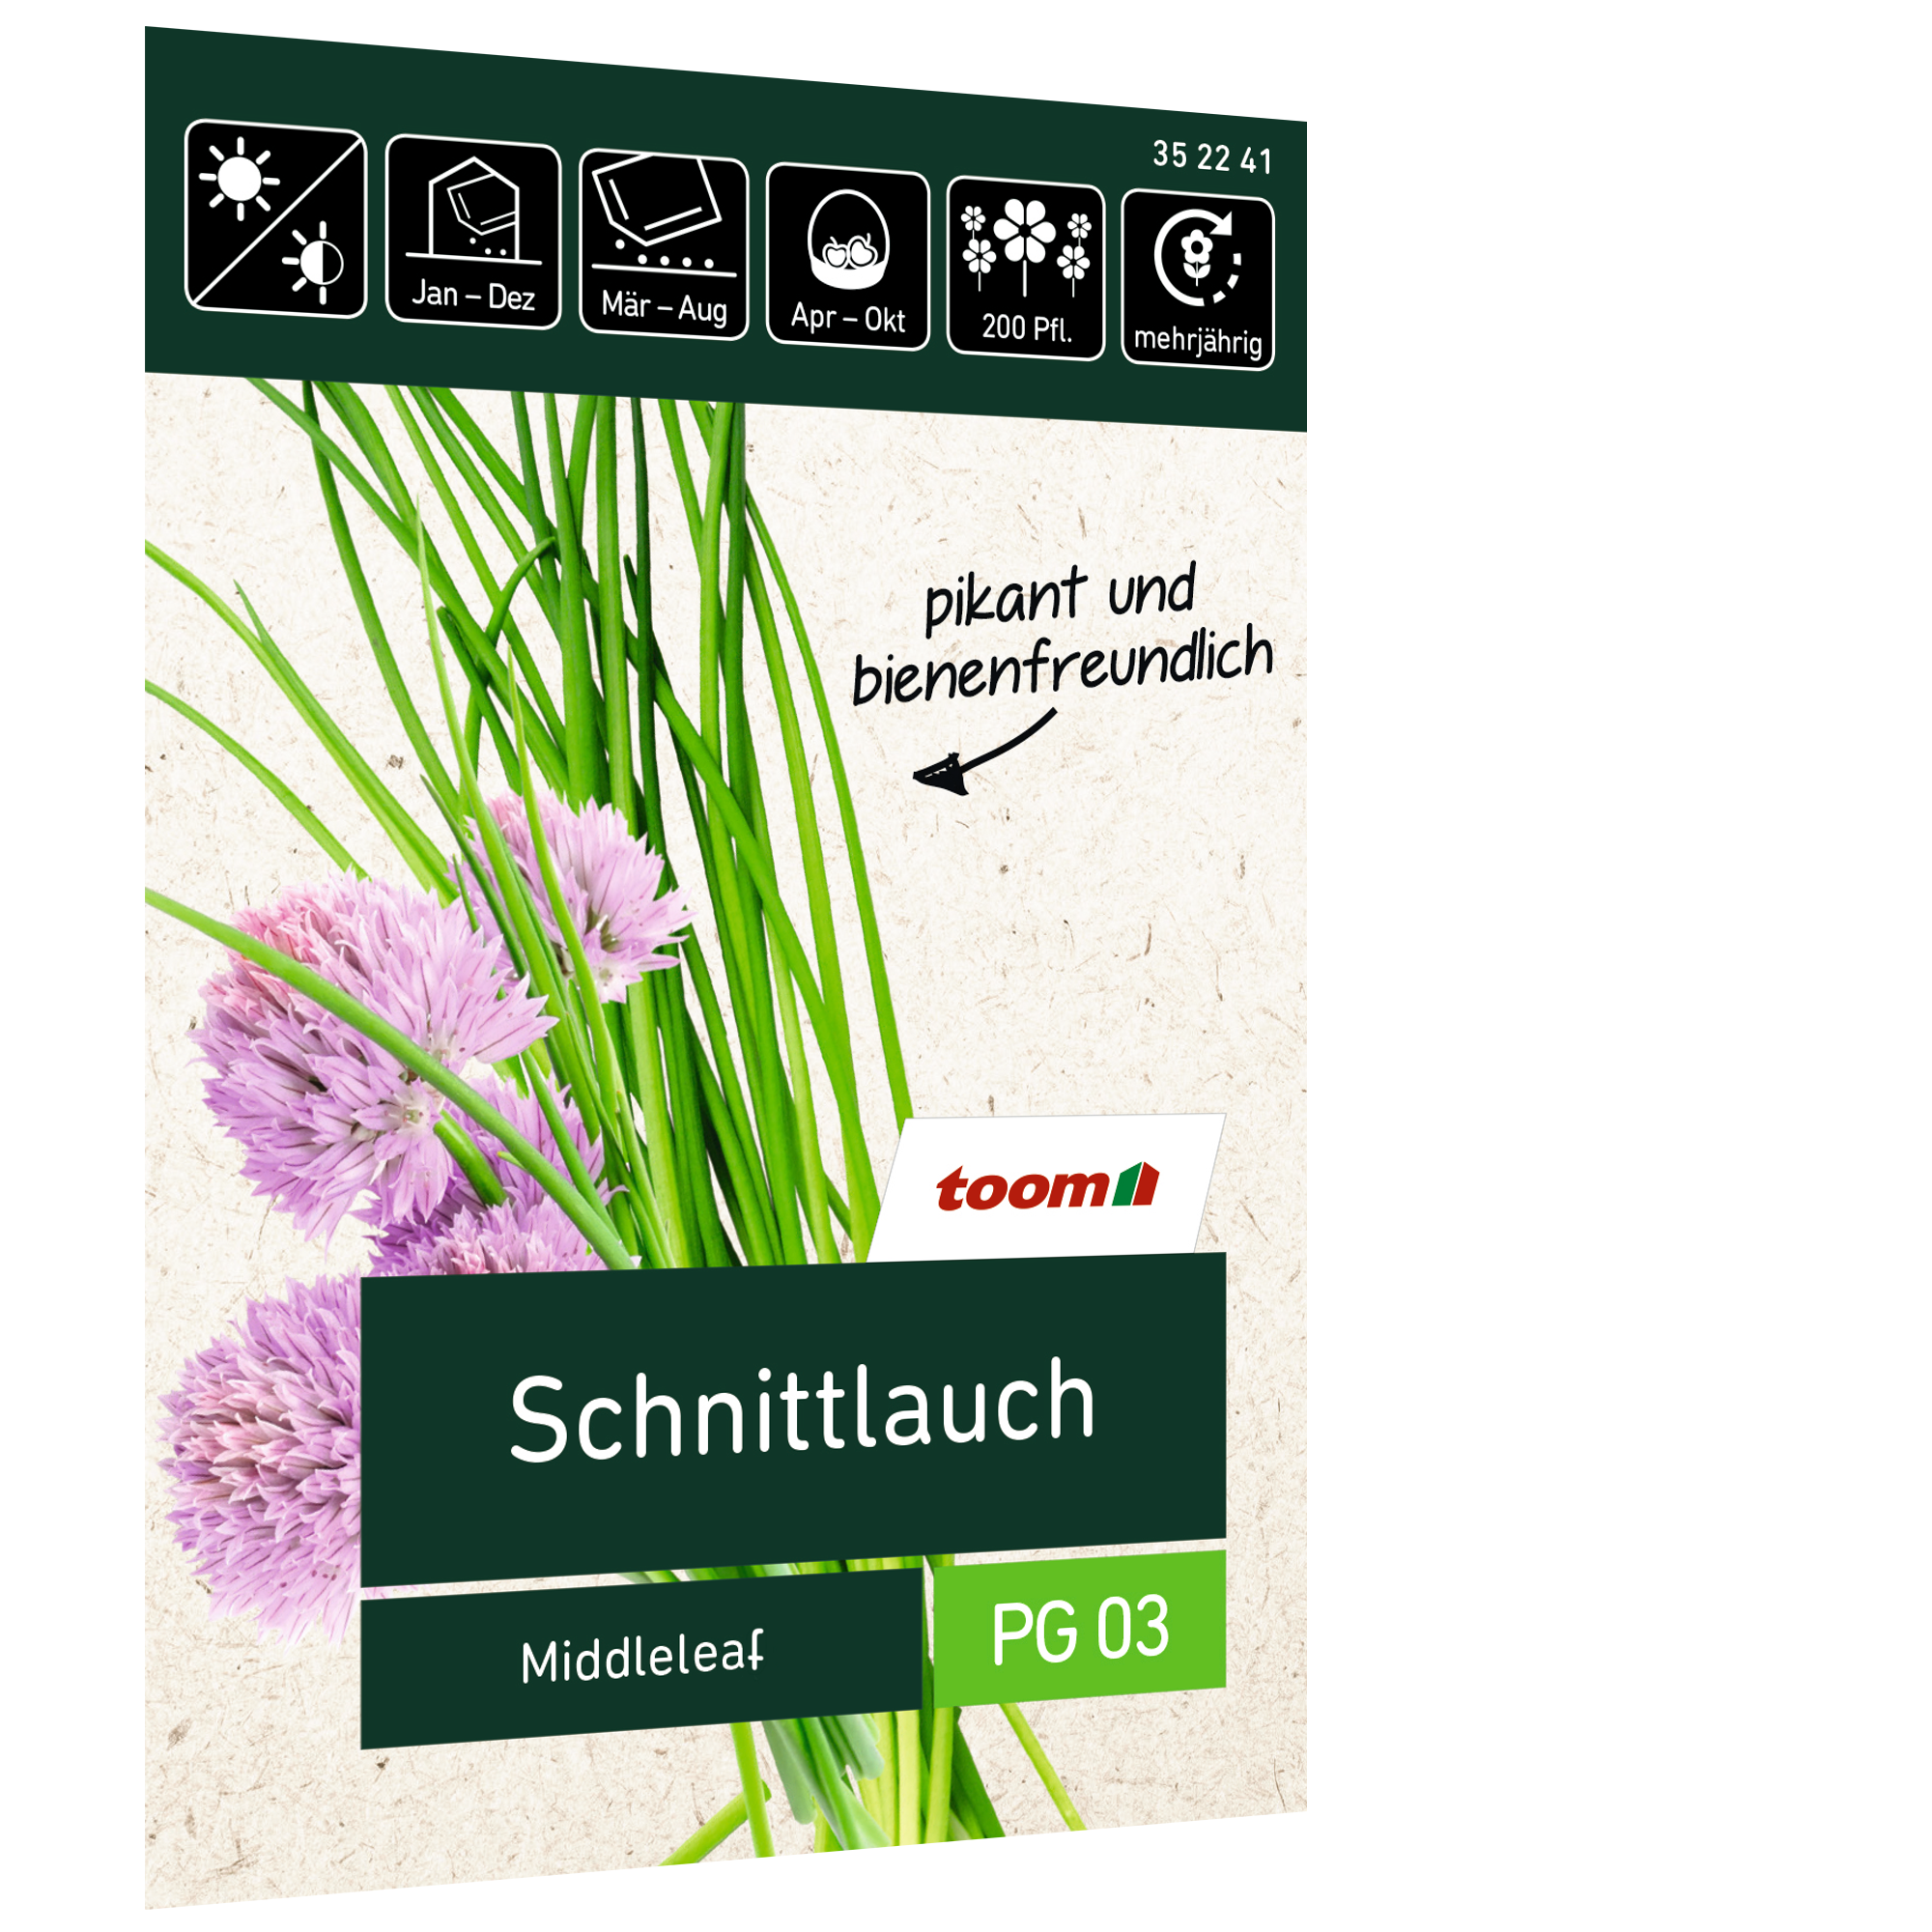 Schnittlauch 'Middleleaf' + product picture